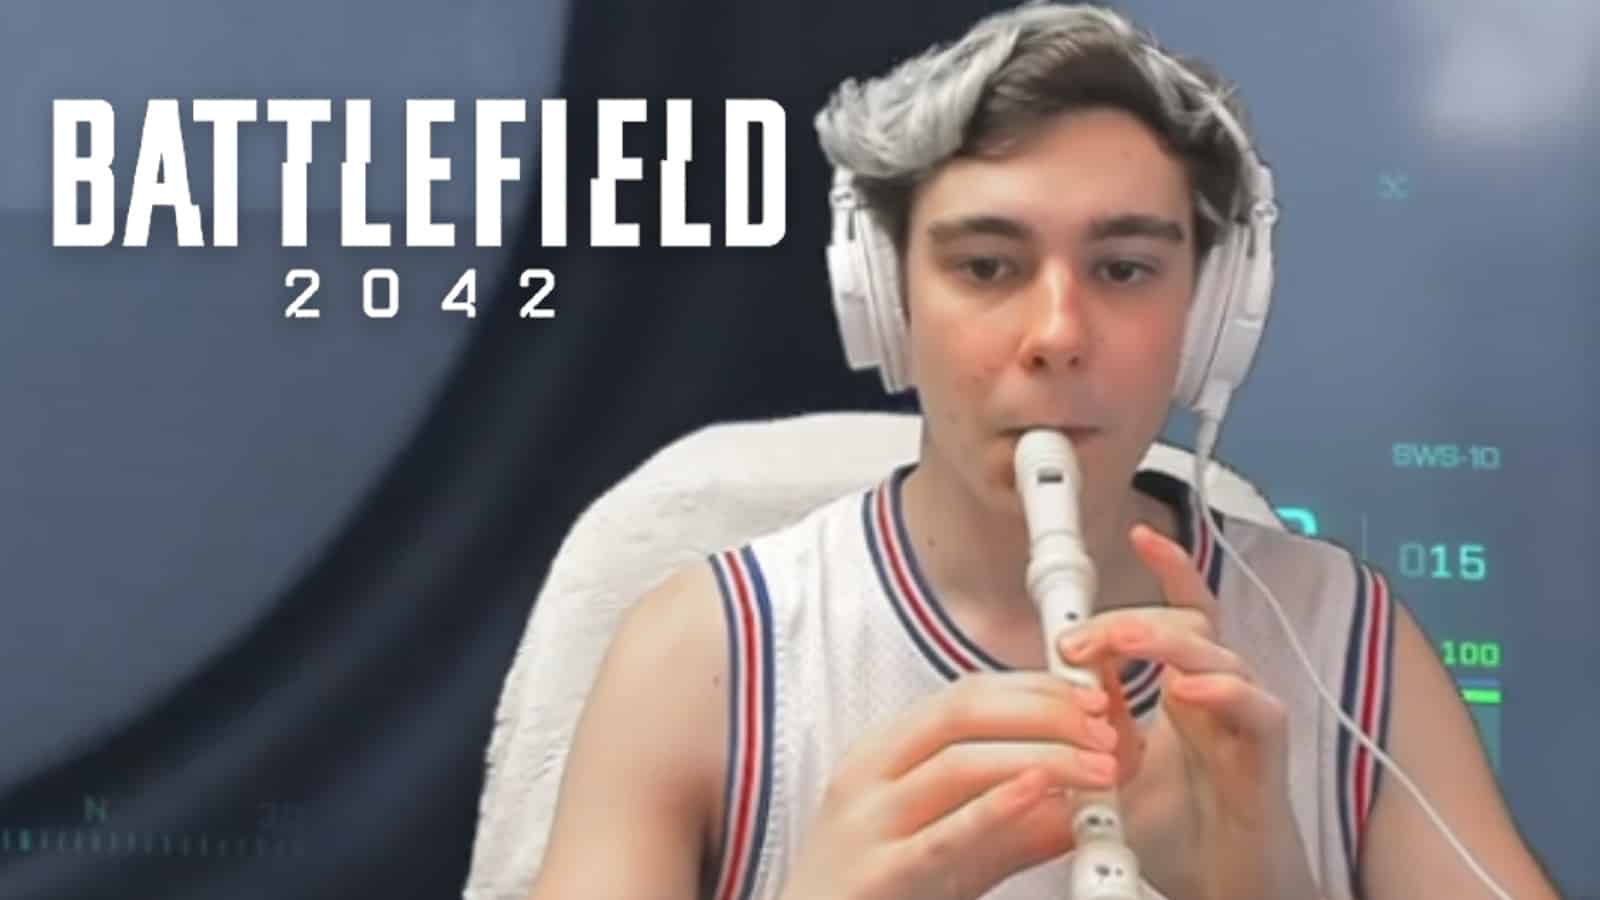 Battlefield streamer snipes with a recorder